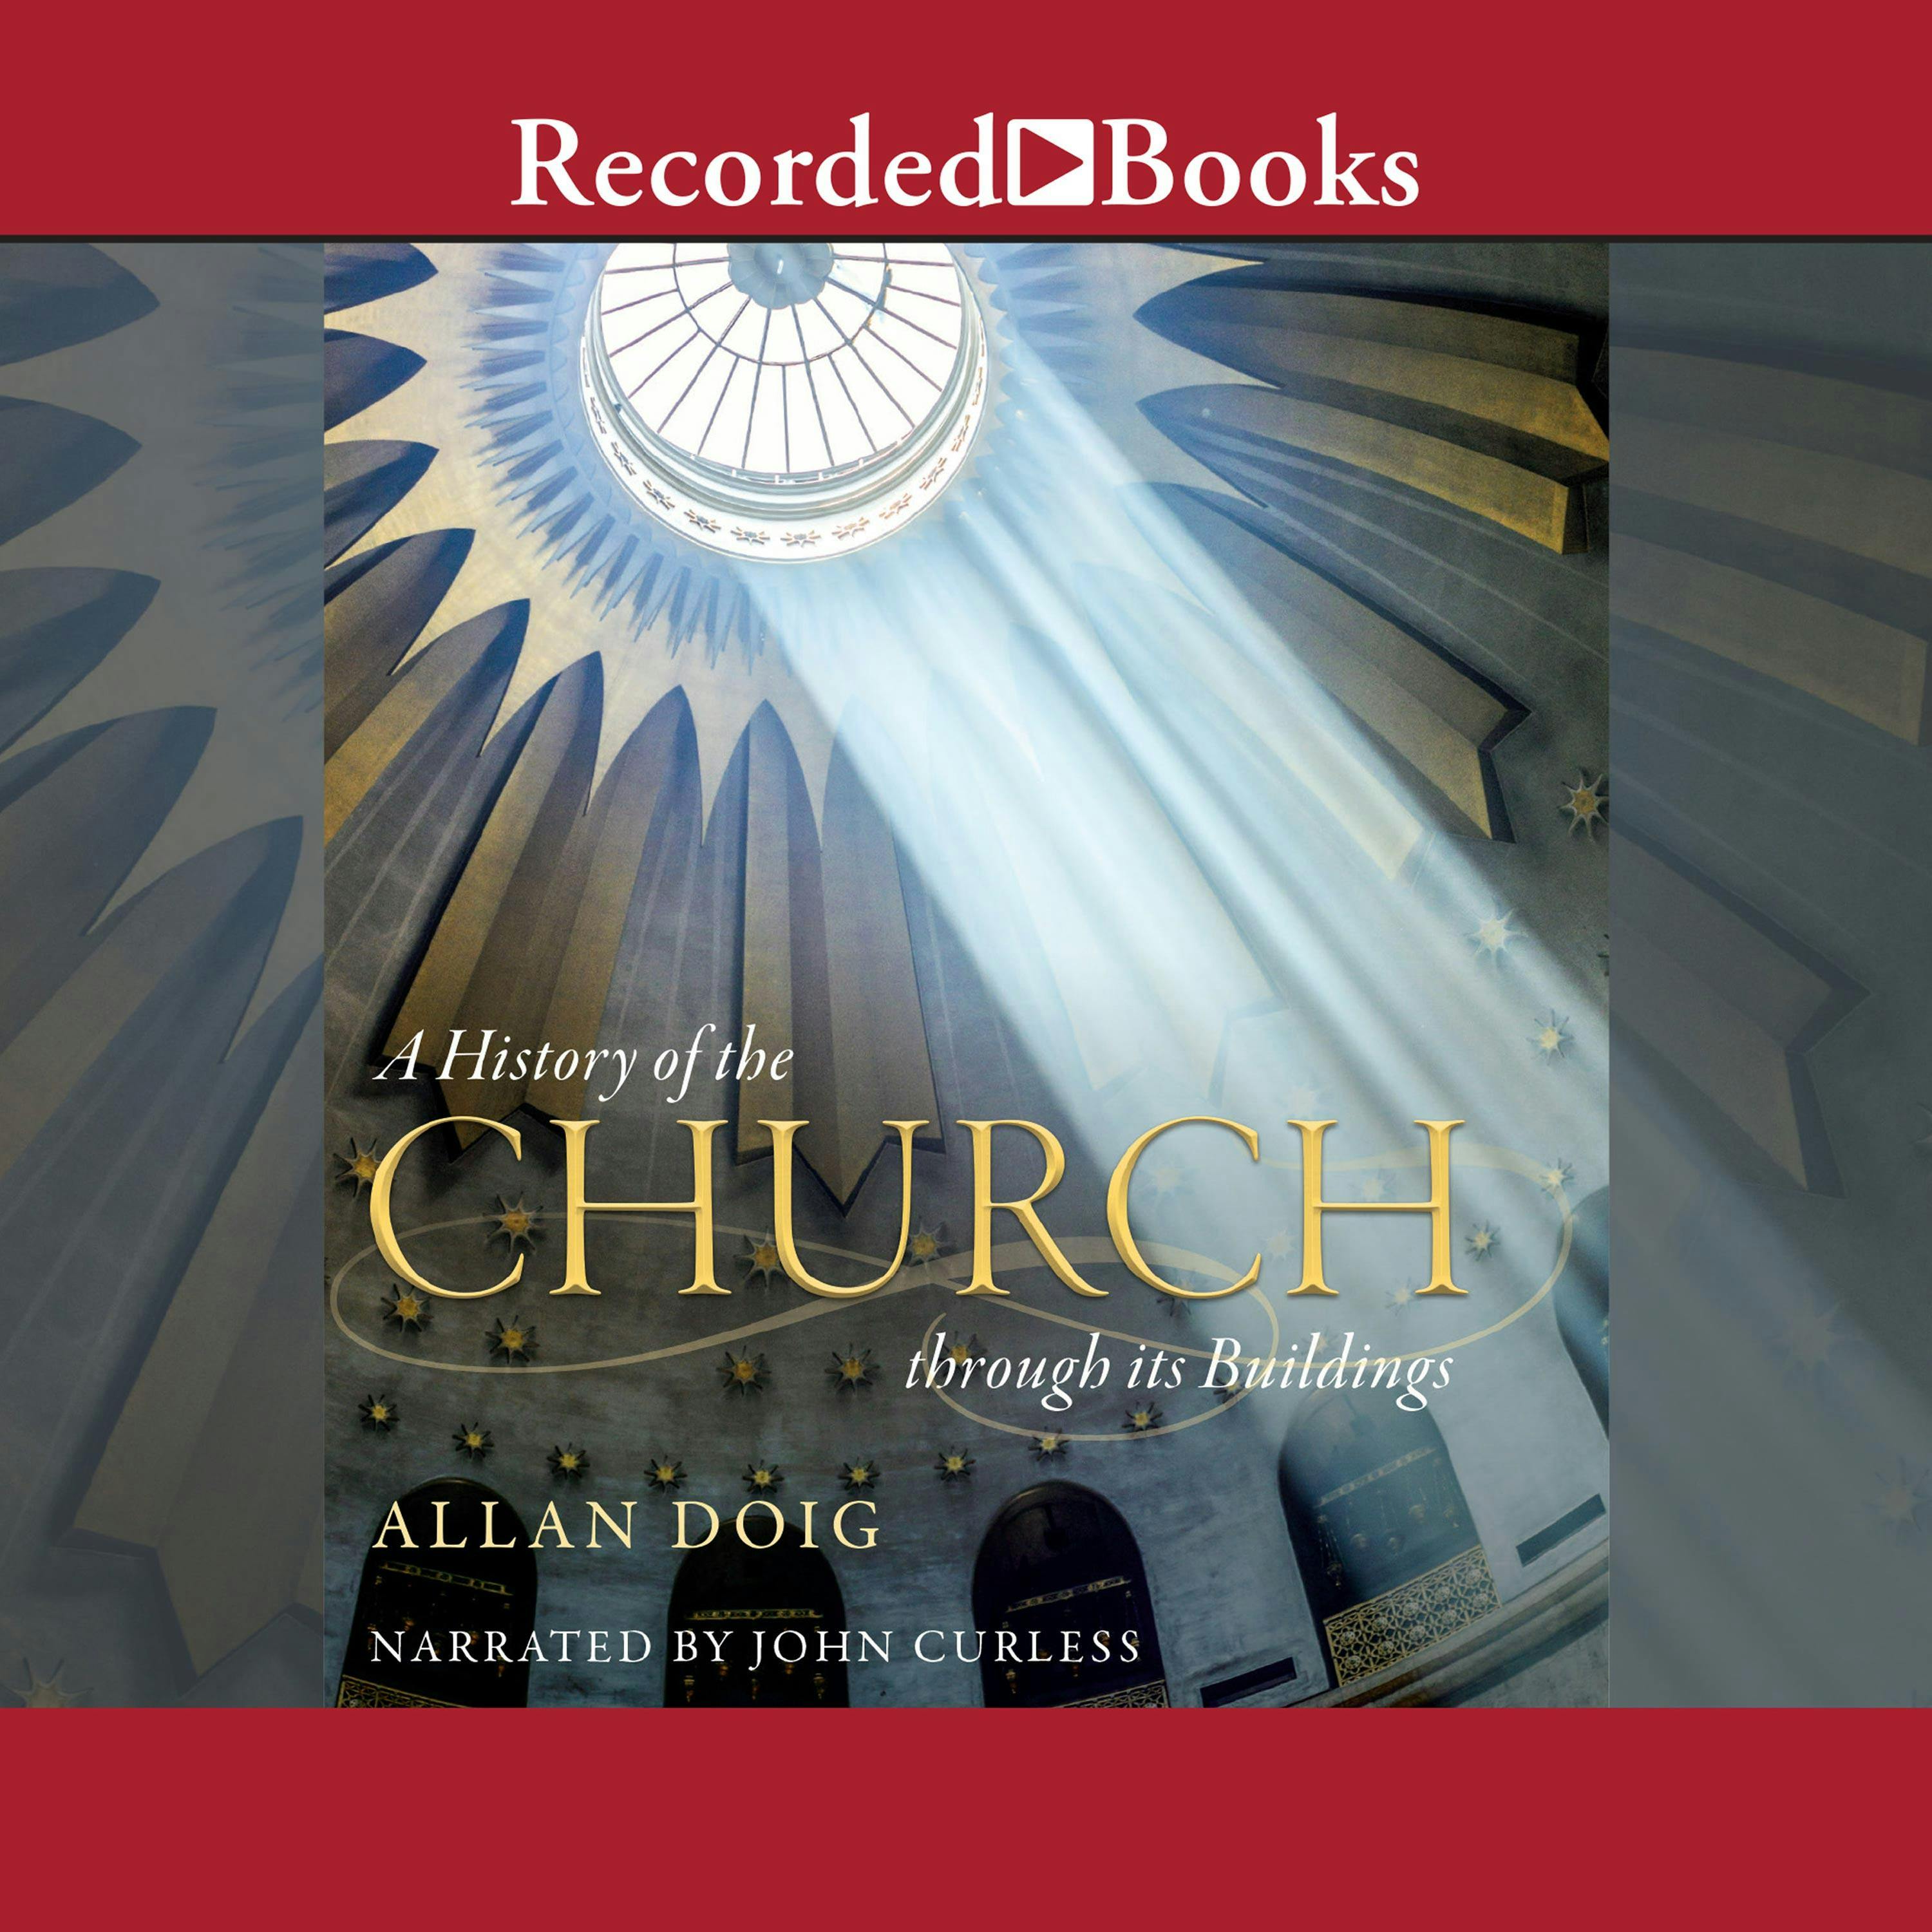 A History of the Church Through It's Buildings - Allan Doig